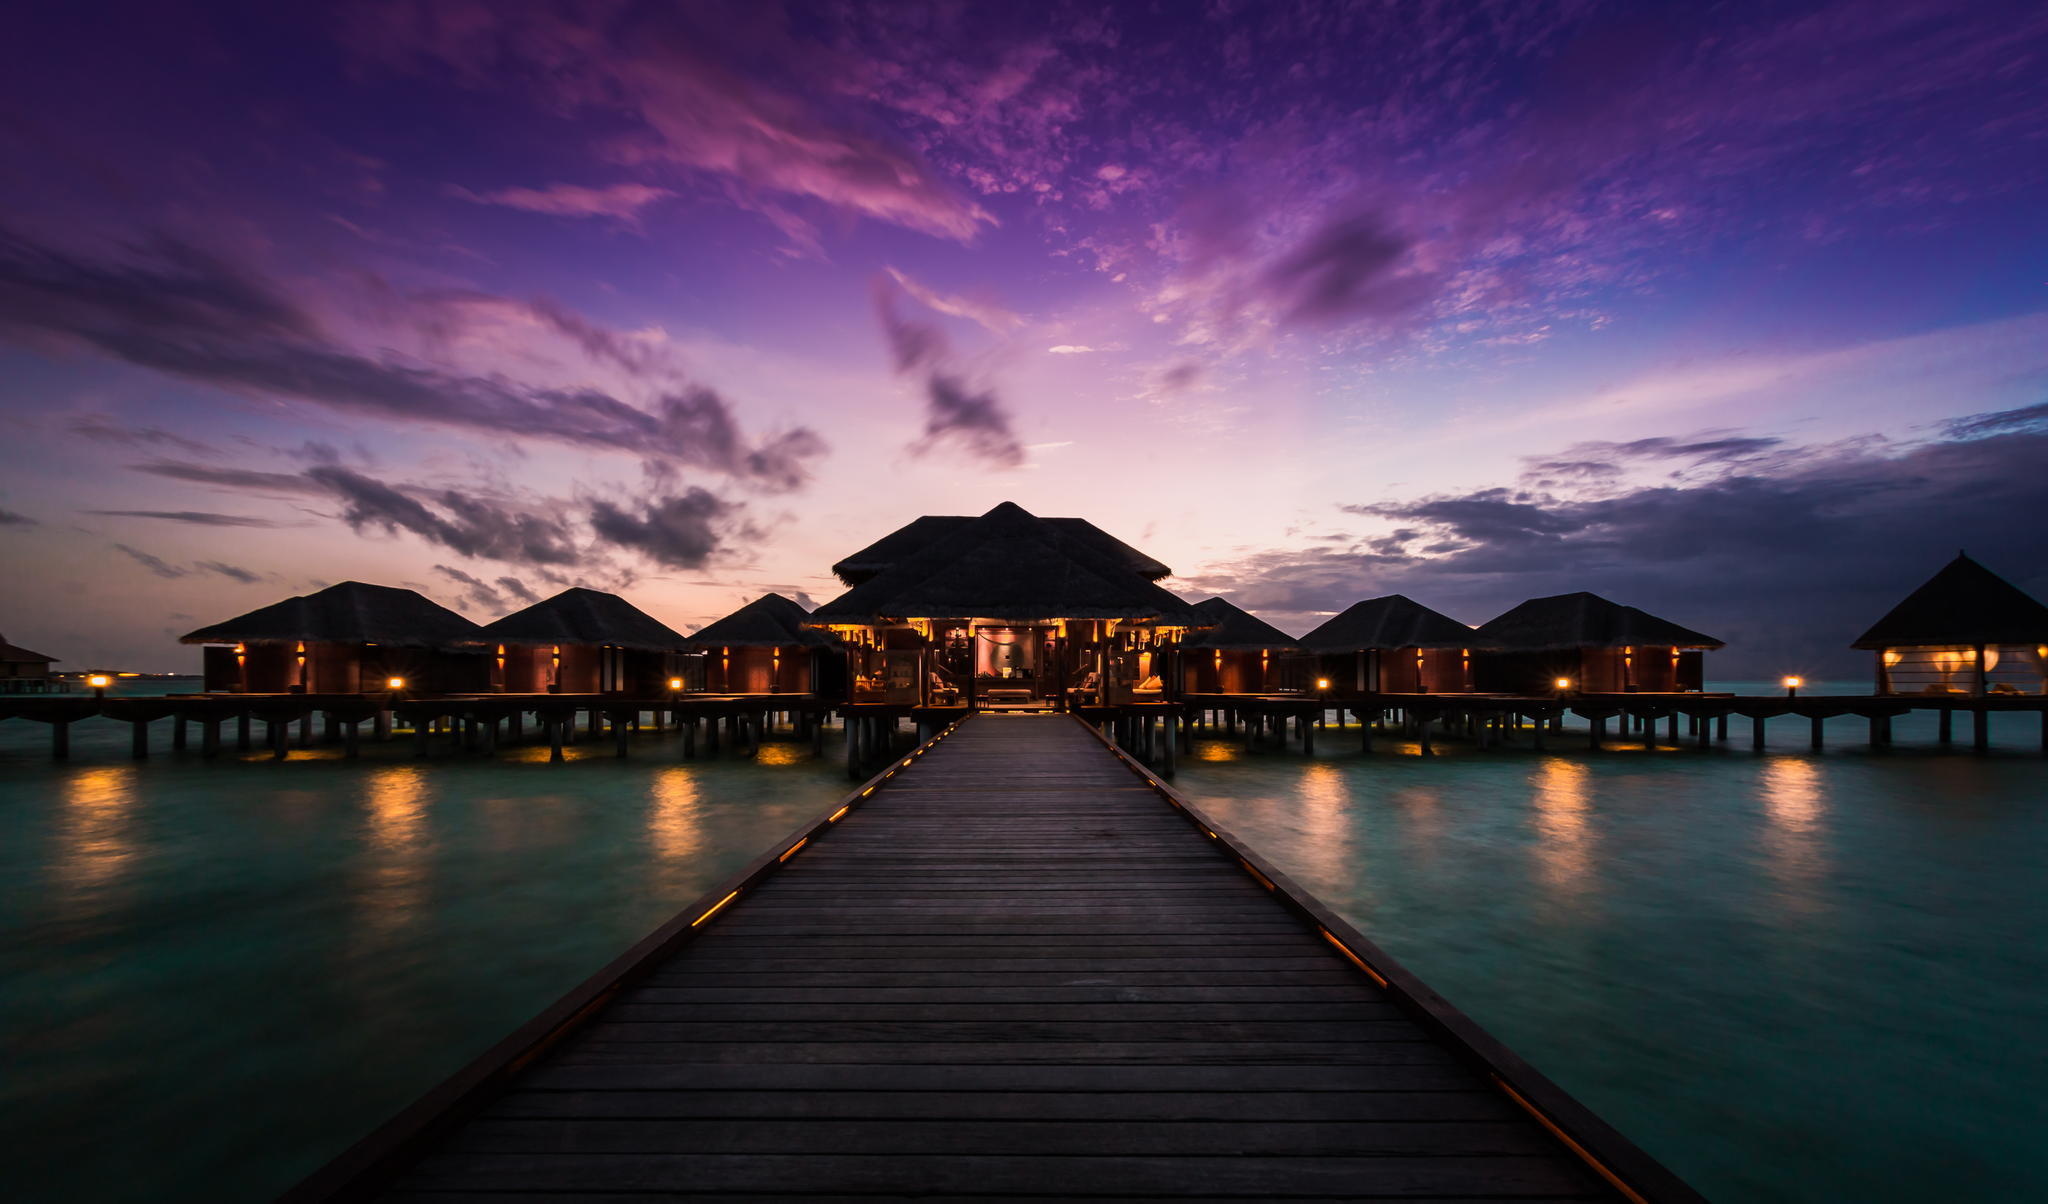 Bungalow: Anantara Dhigu Maldives Resort during the magnificent sunset in the ocean. 2050x1210 HD Wallpaper.